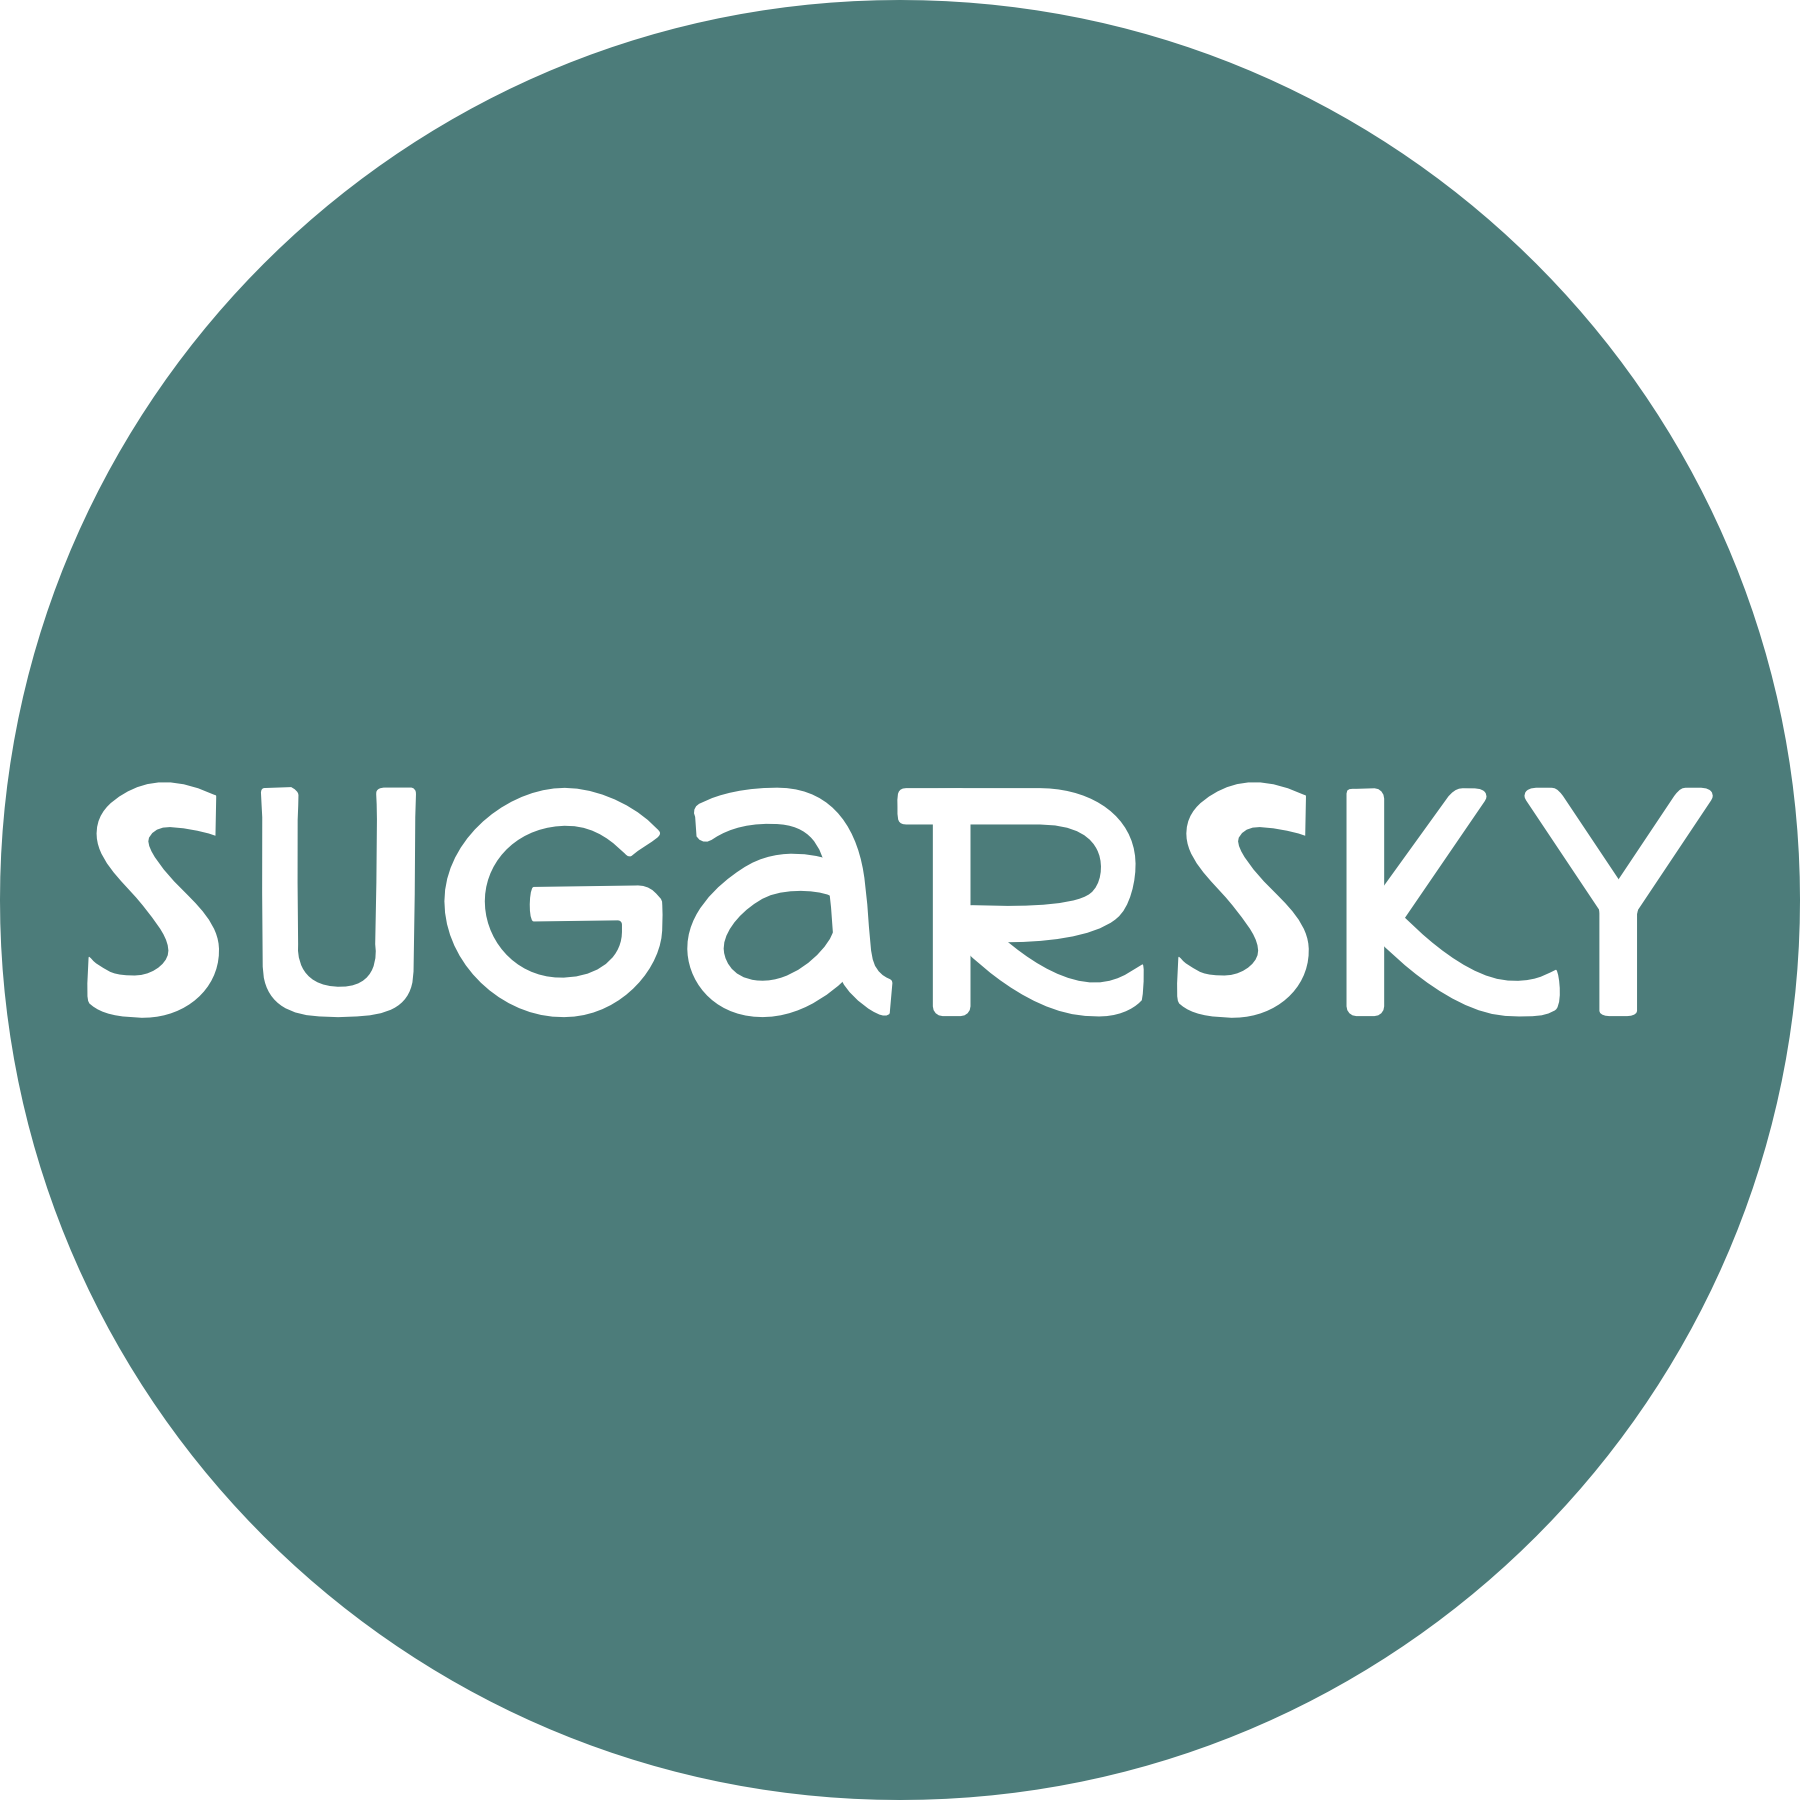 SugarSky Help Center home page